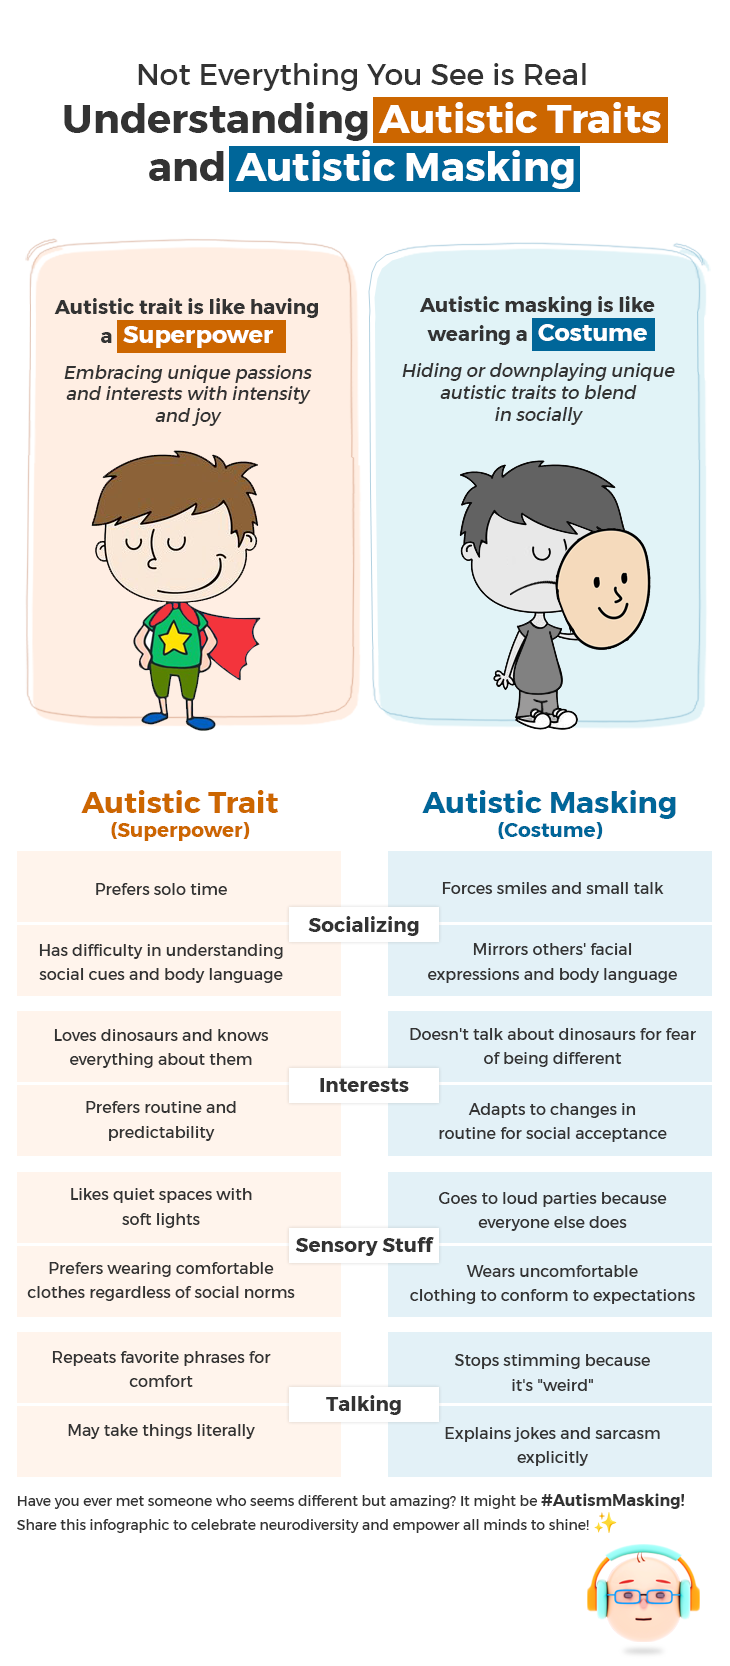 Infographic portraying the understanding of autism traits and autism masking, not everything you see is real.